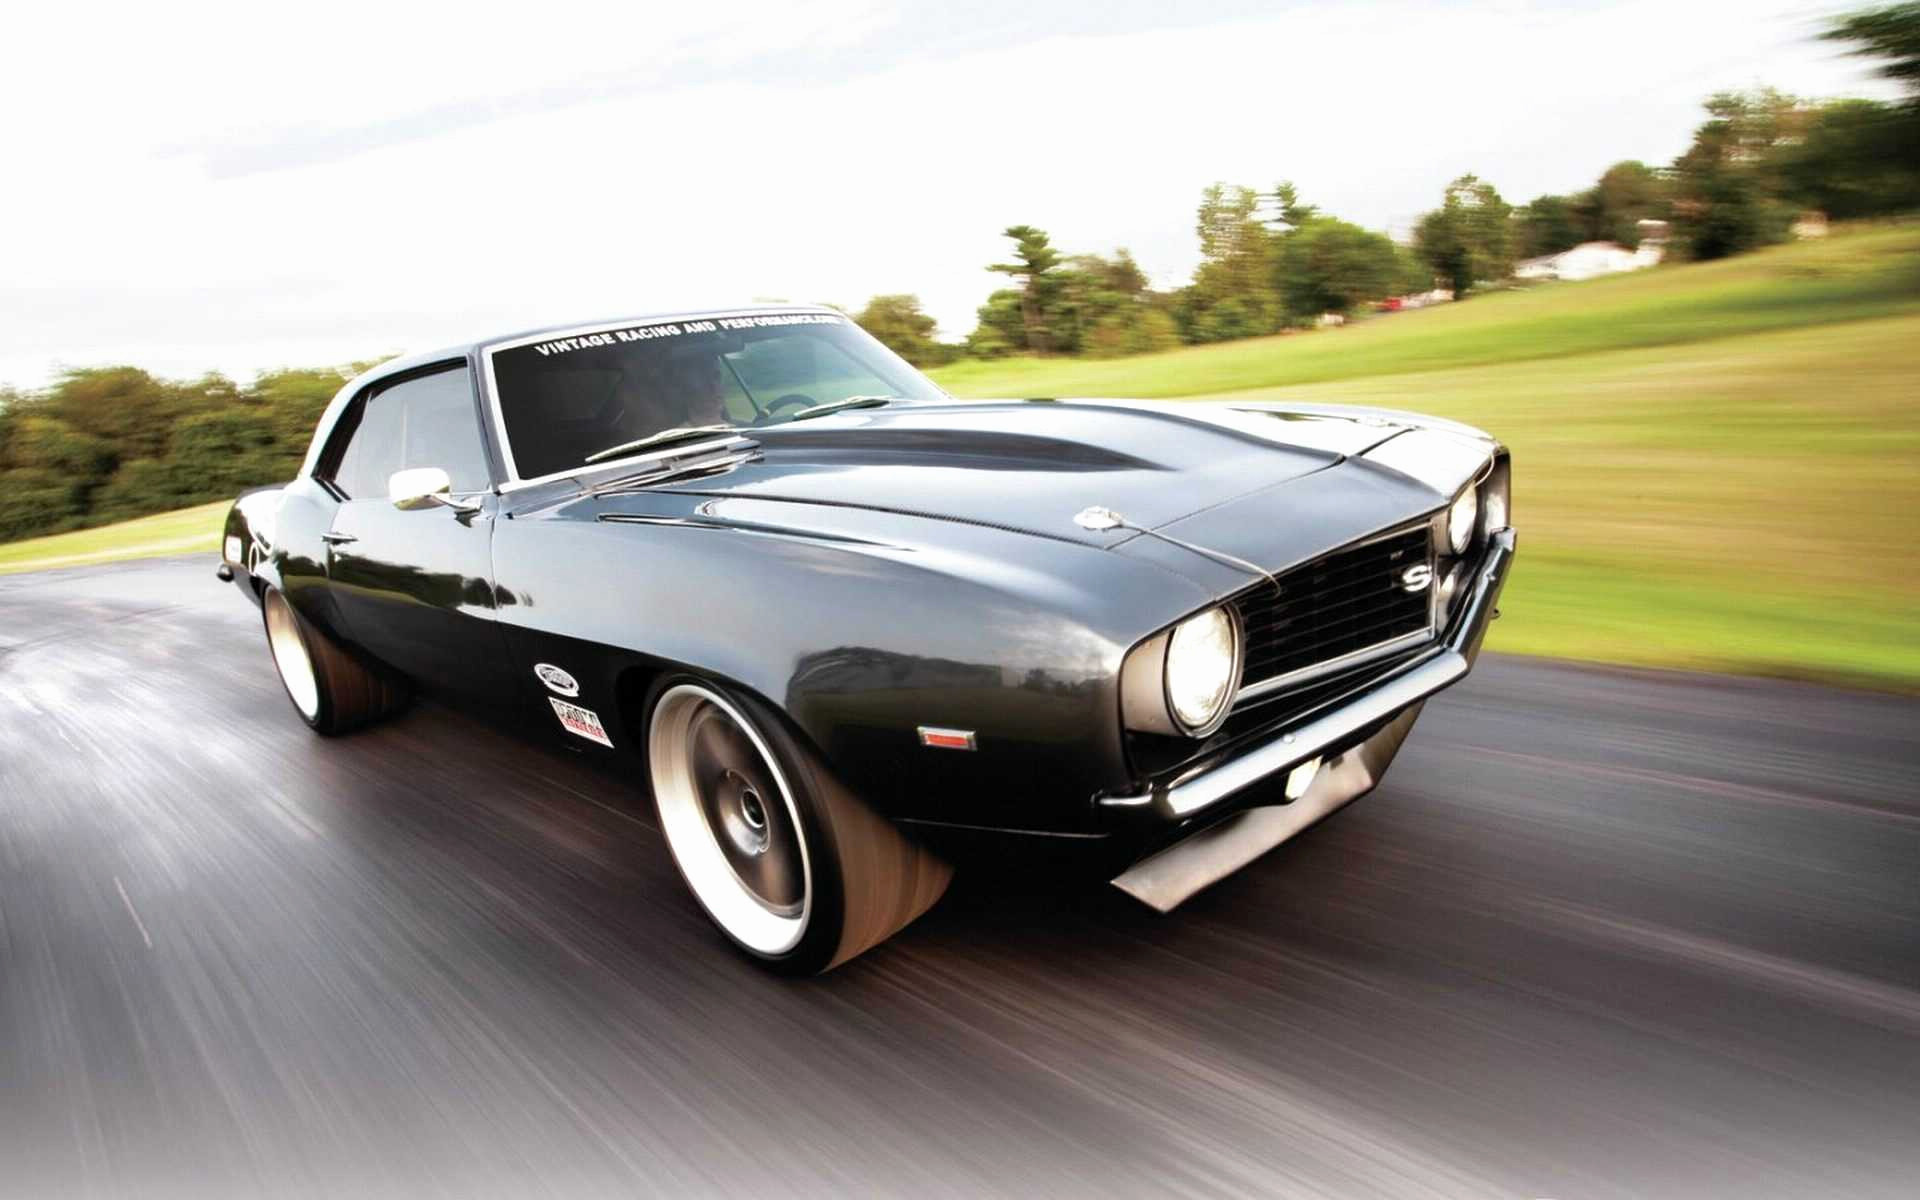 1920x1200 Hd Wallpapers Classic Cars Fresh Old Camaro Wallpapers Group 72